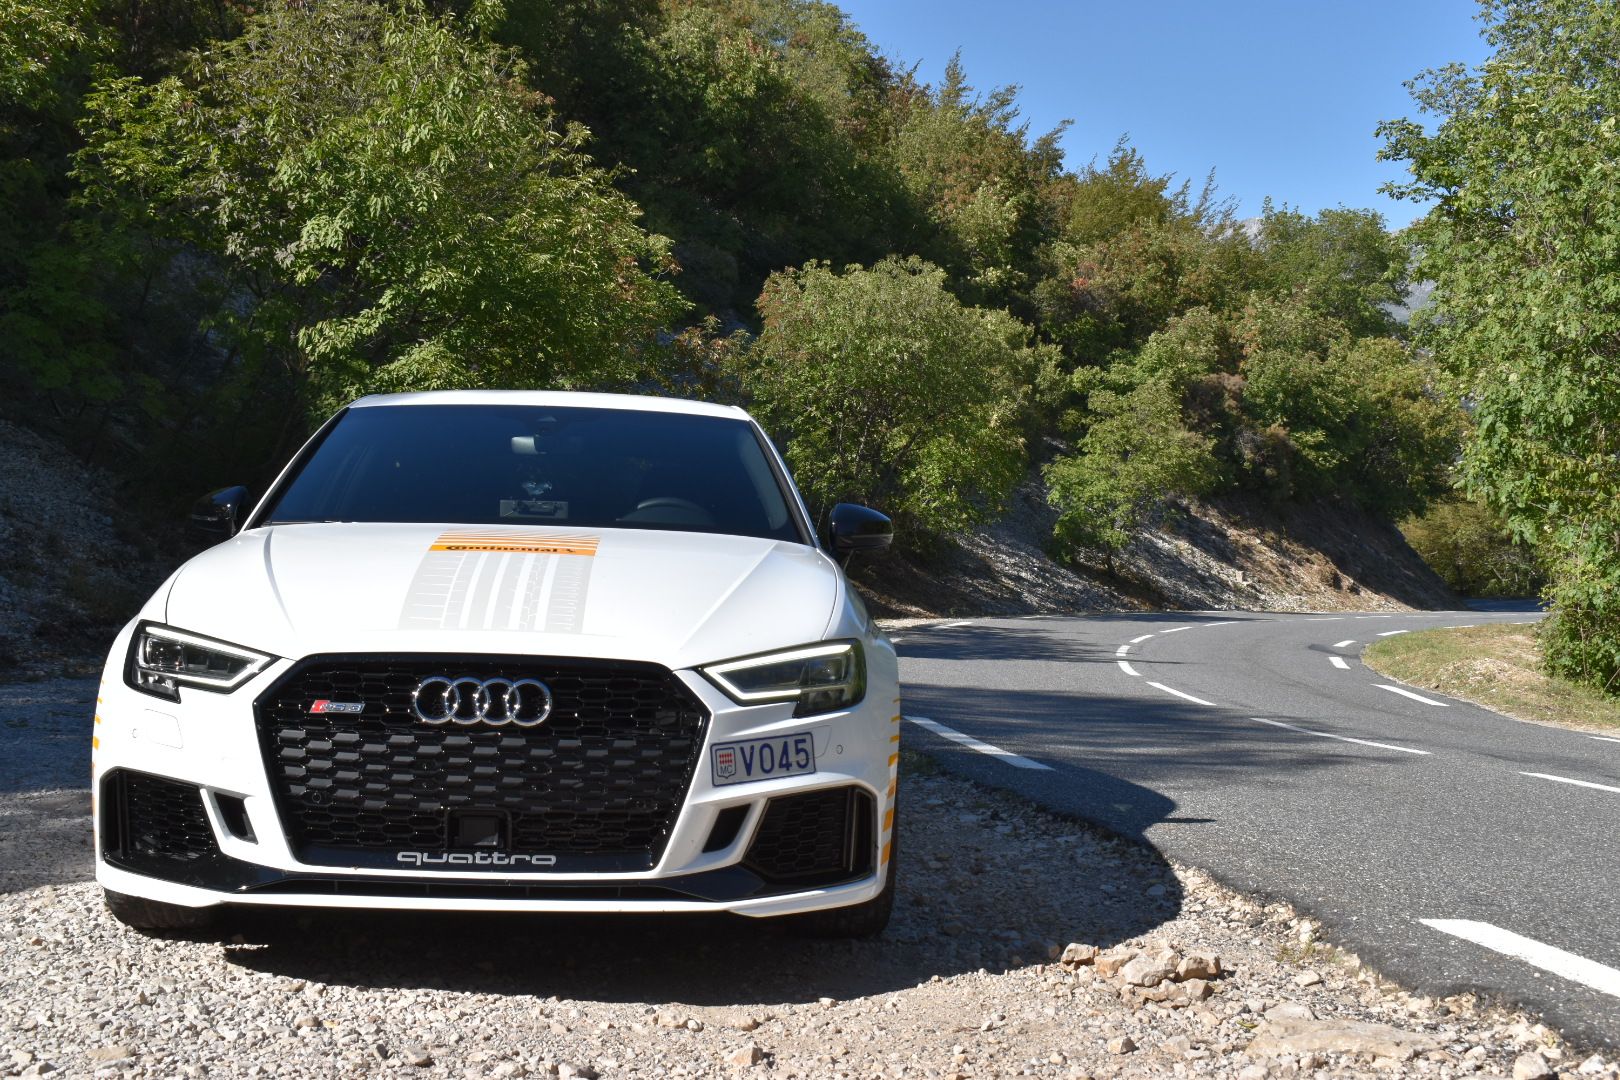 2018 Test Drive - An Honest Take on the 2019 Audi RS3 Sportback